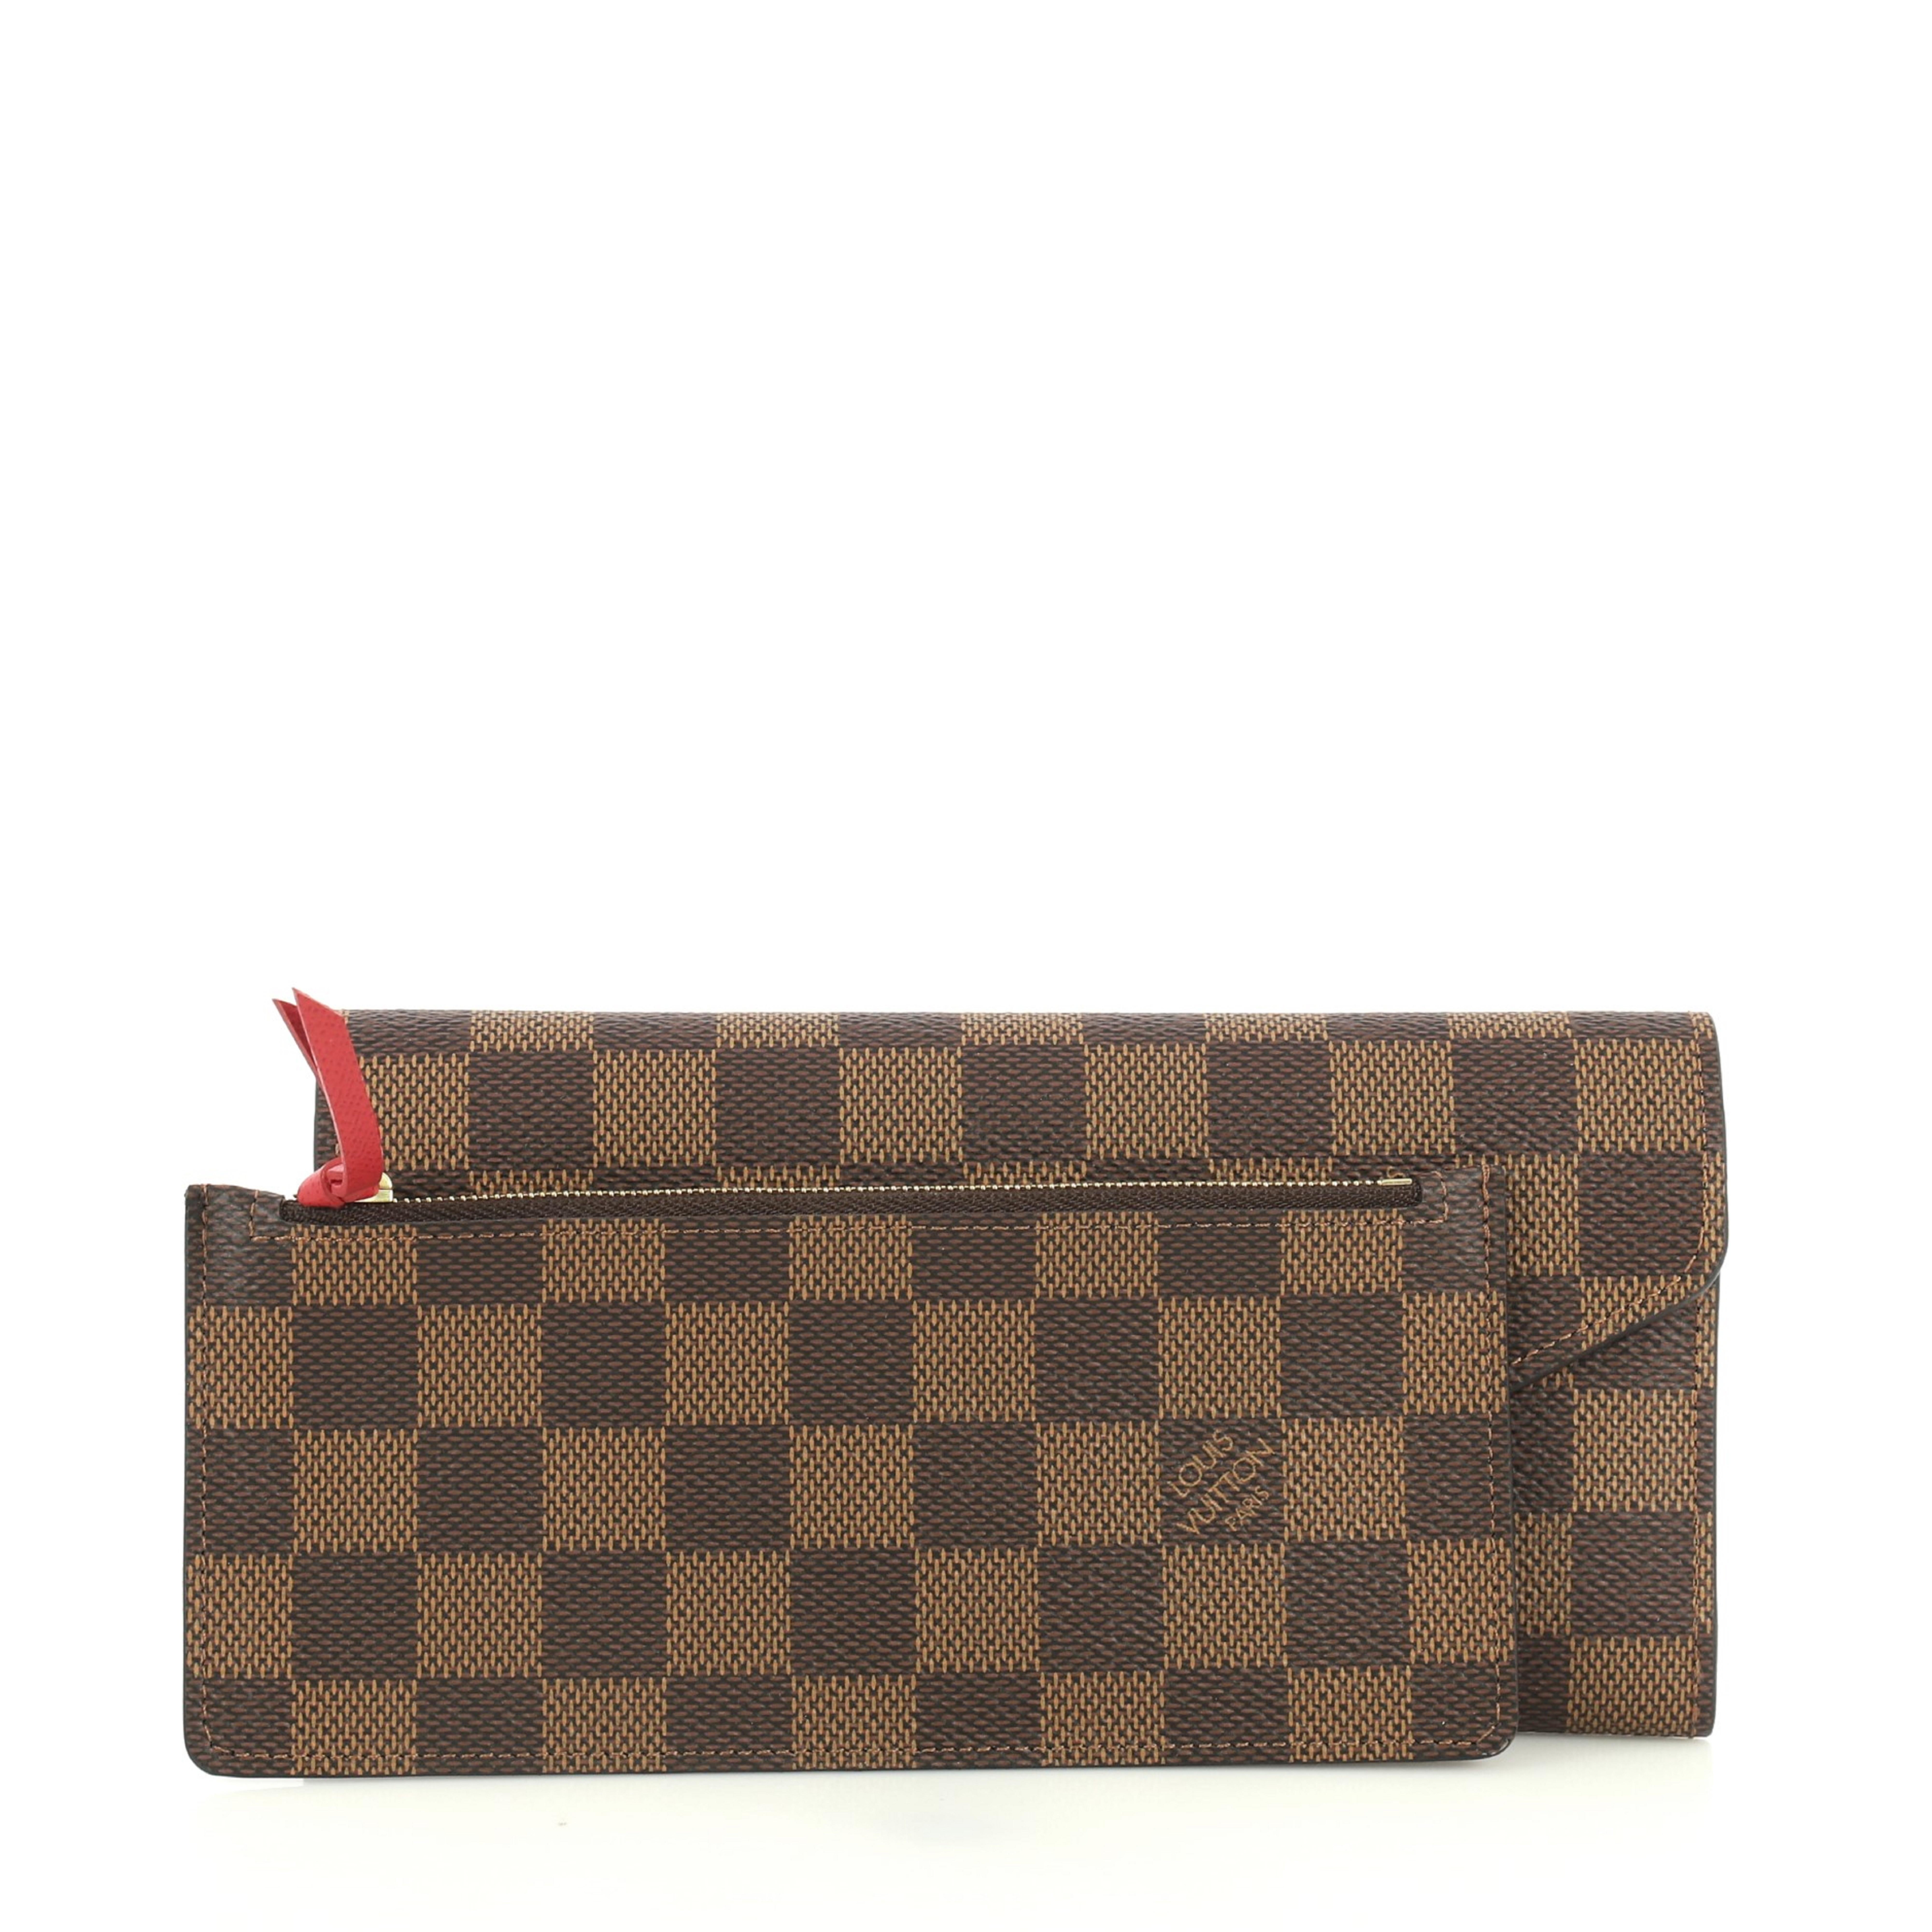 This Louis Vuitton Josephine Wallet NM Damier, crafted in damier ebene coated canvas, features gold-tone hardware. Its snap button closure opens to a red leather and damier ebene coated canvas interior with two large compartments and multiple card